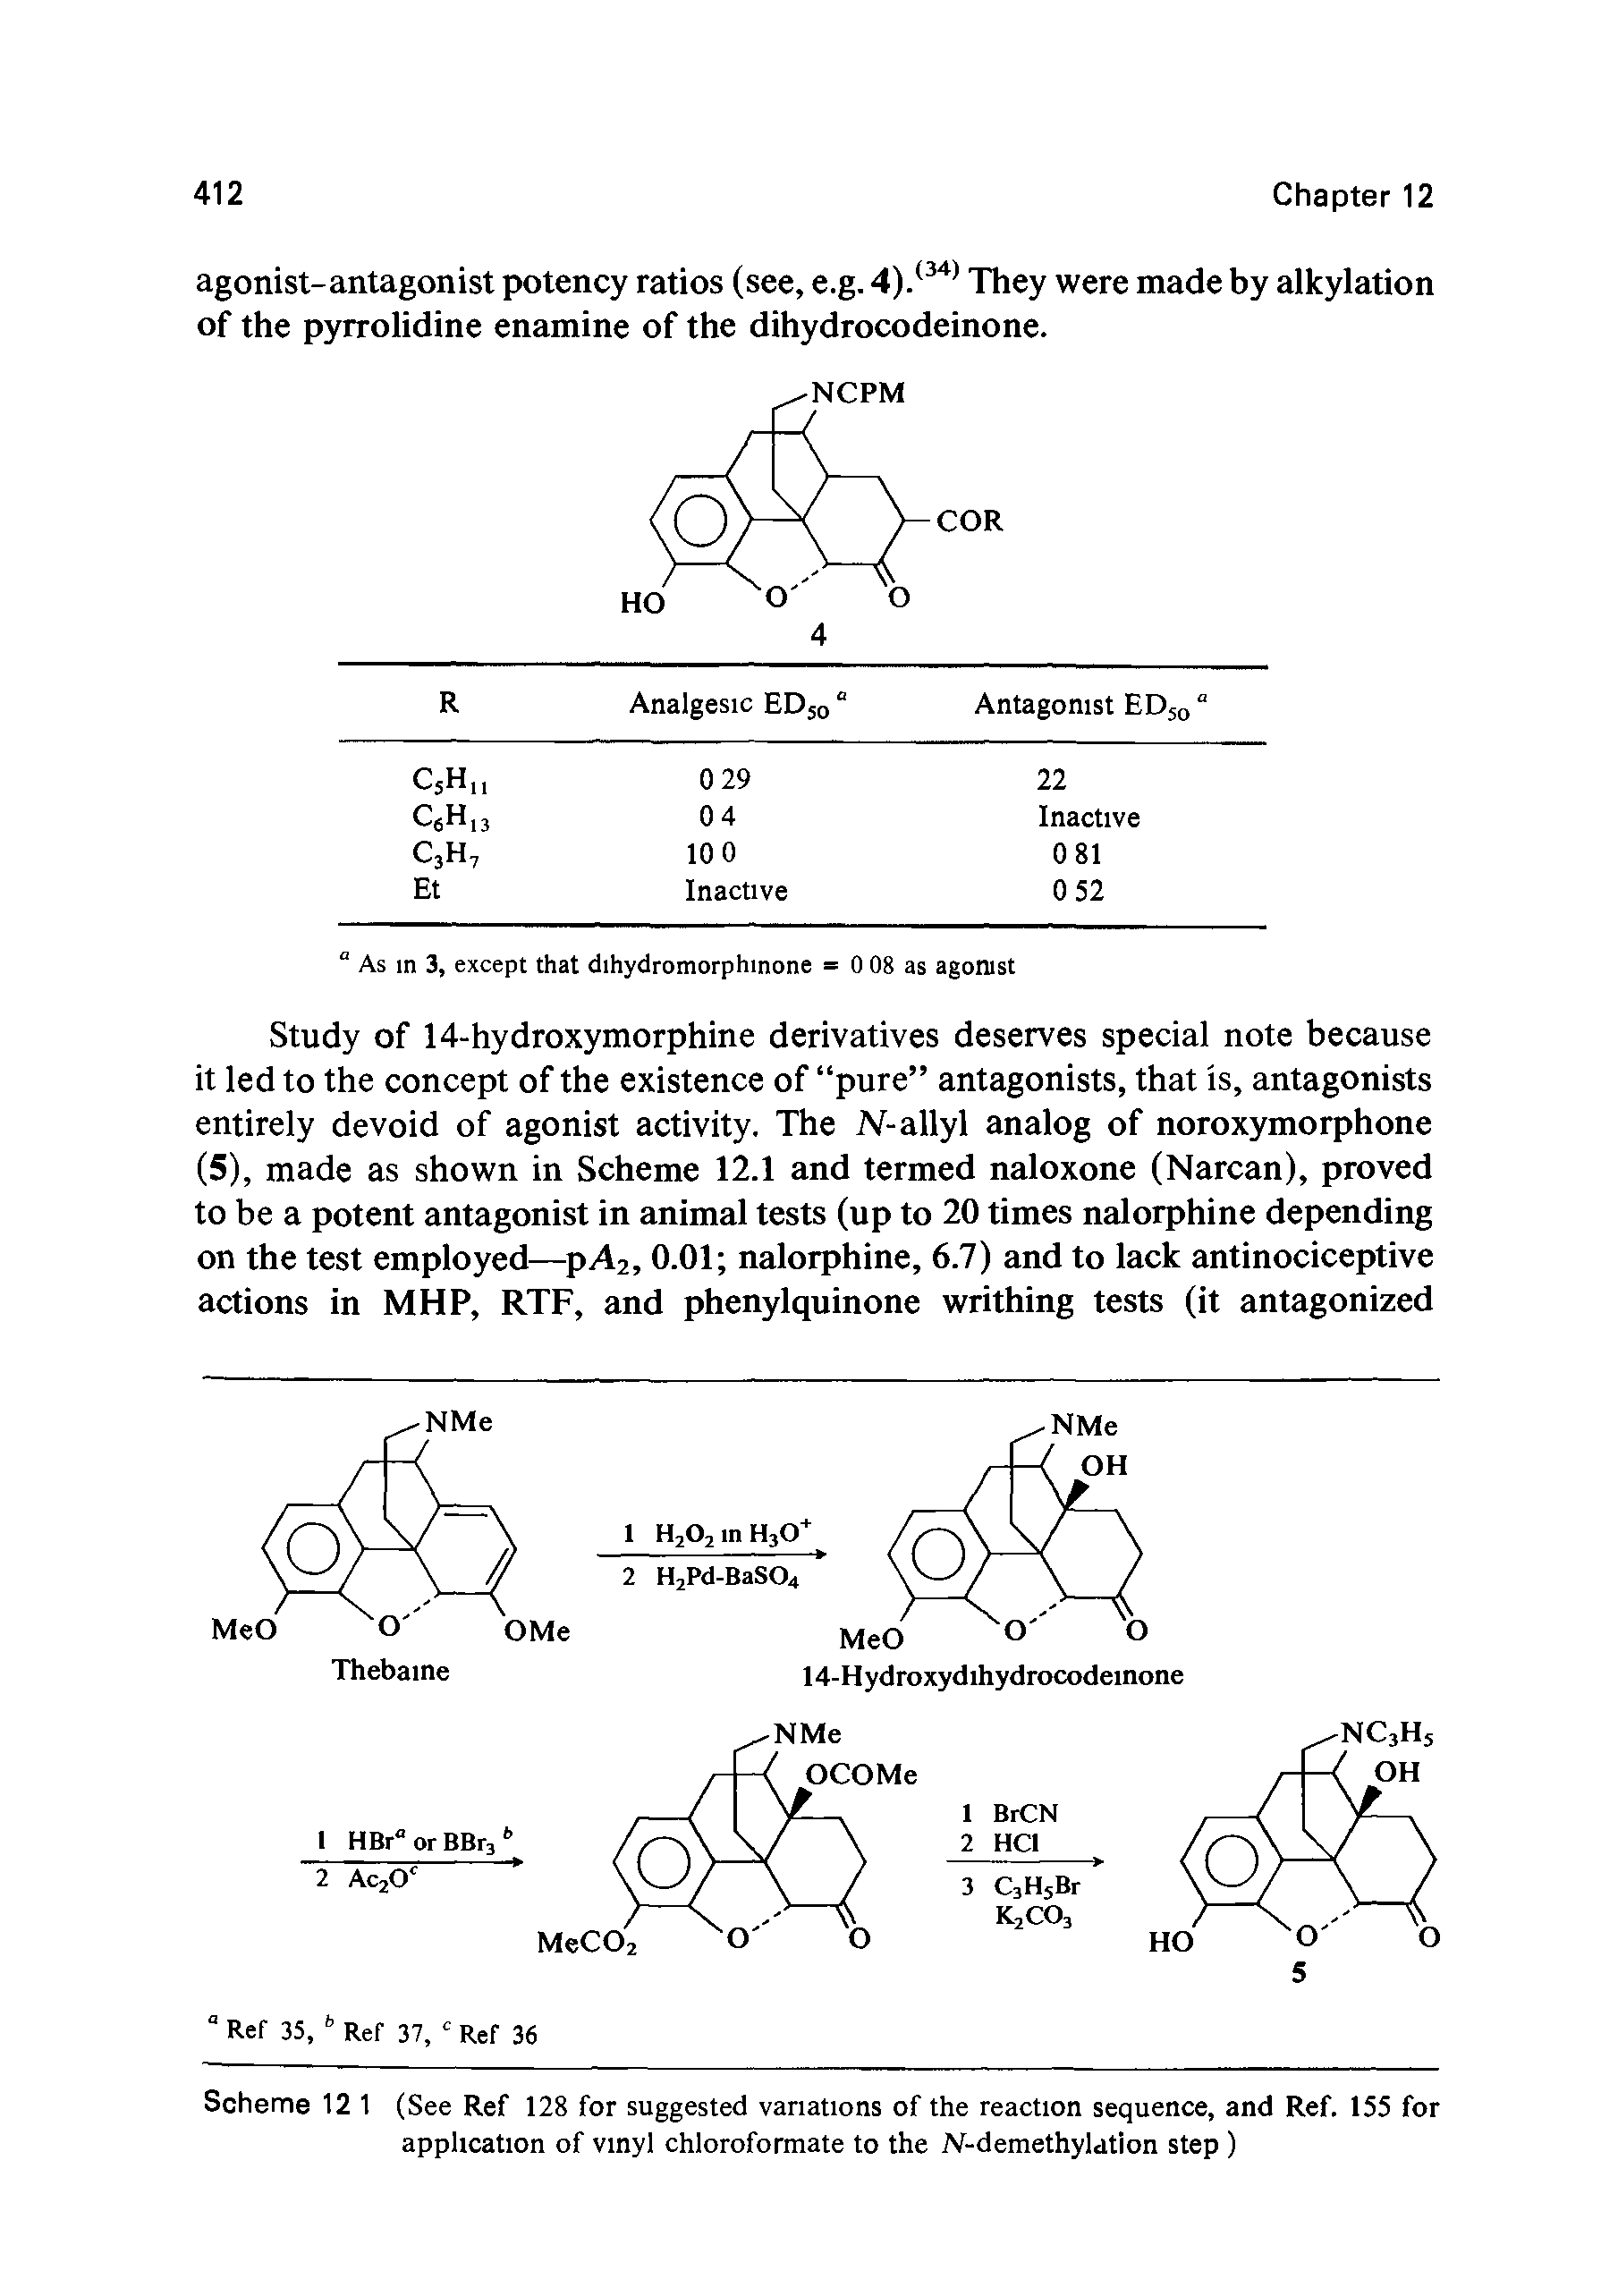 Scheme 12 1 (See Ref 128 for suggested variations of the reaction sequence, and Ref. 155 for application of vinyl chloroformate to the N-demethylation step )...